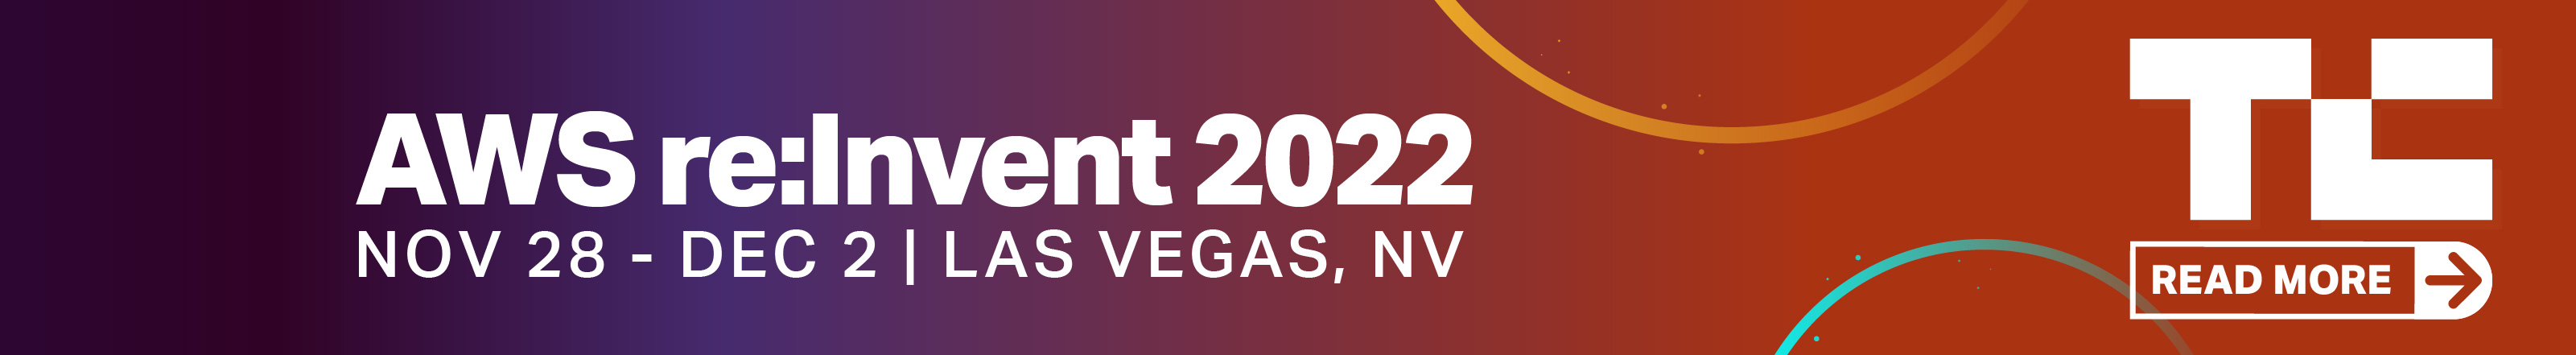 Read more about AWS re:Invent 2022 on Thealike